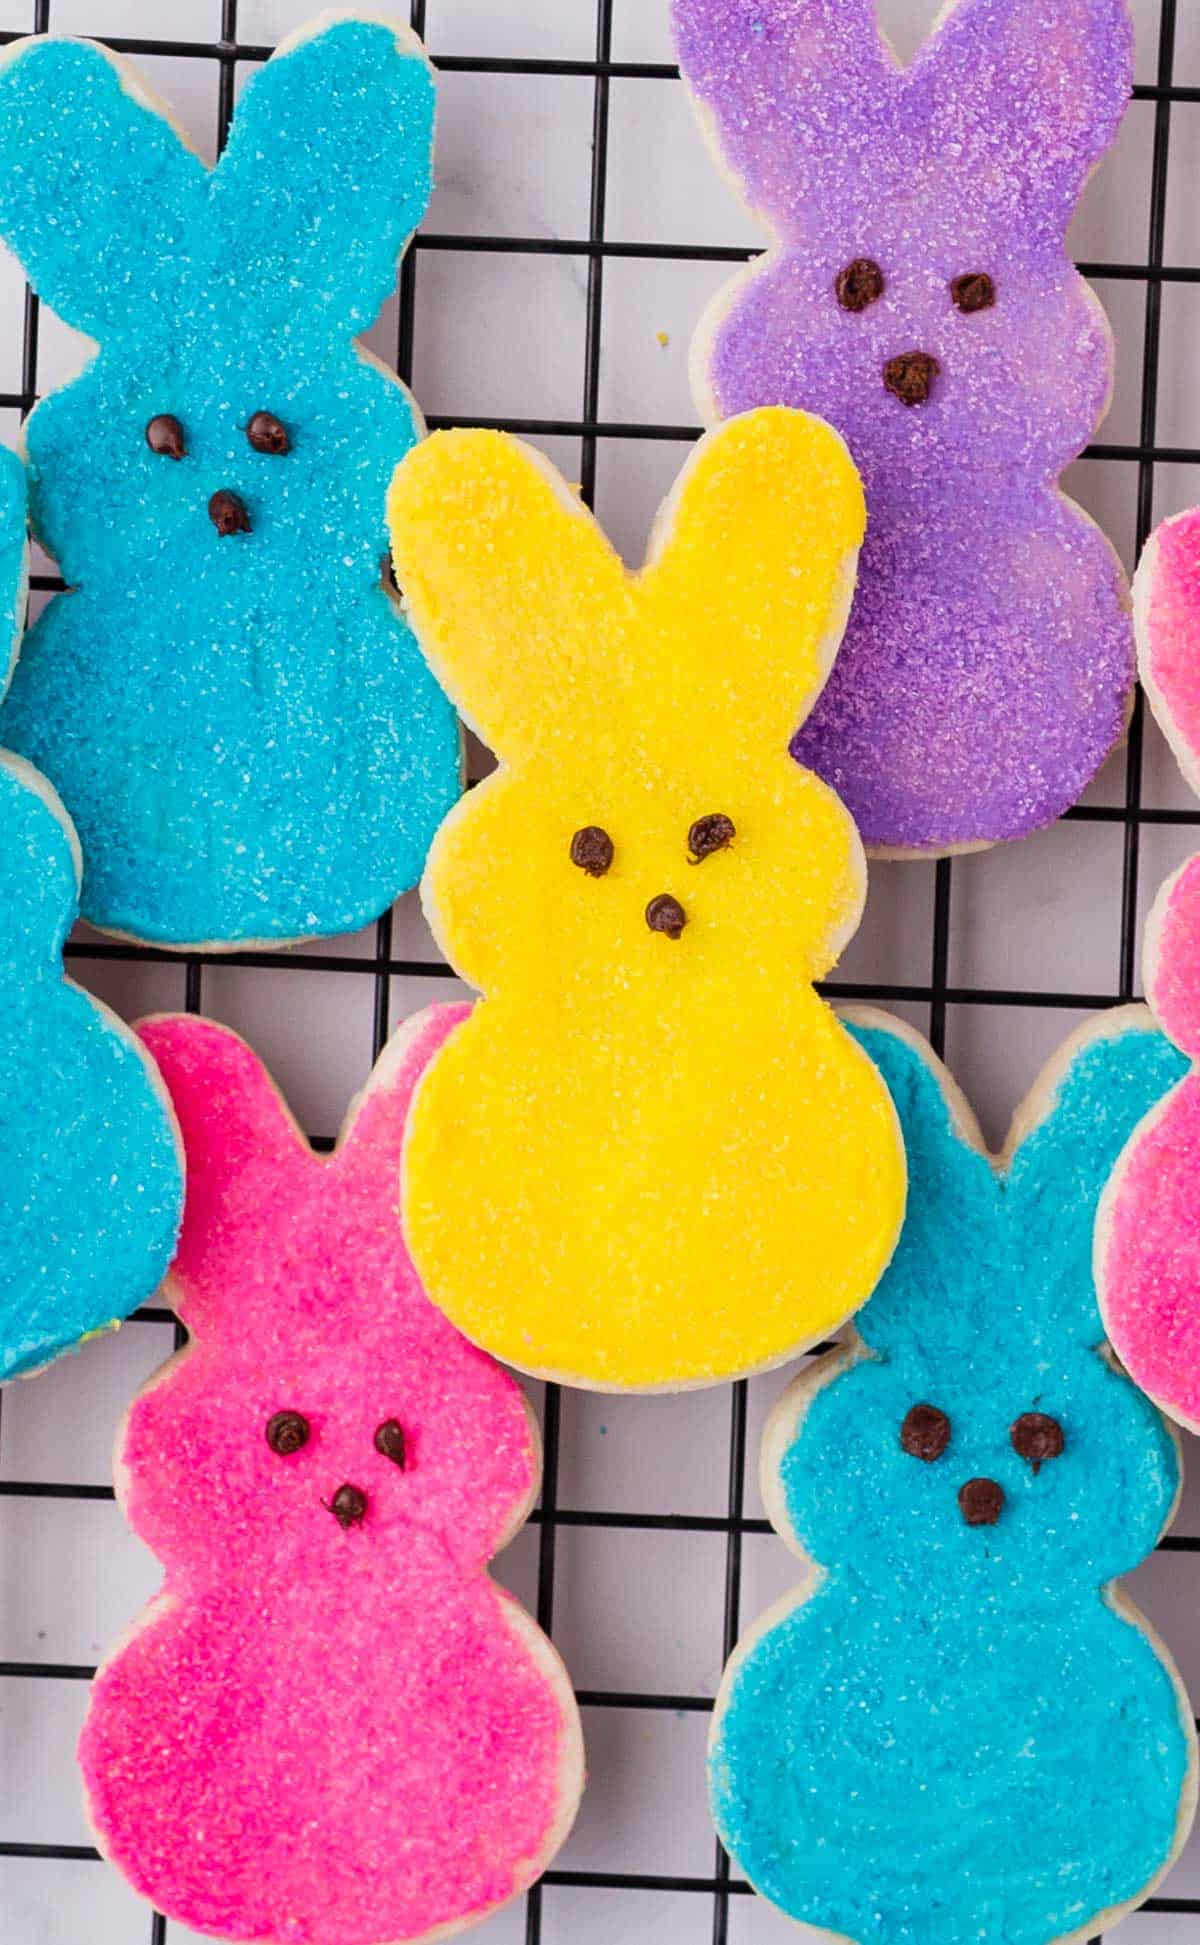 blue, pink, purple and yellow peeps bunny cookies stacked up on a cooling rack